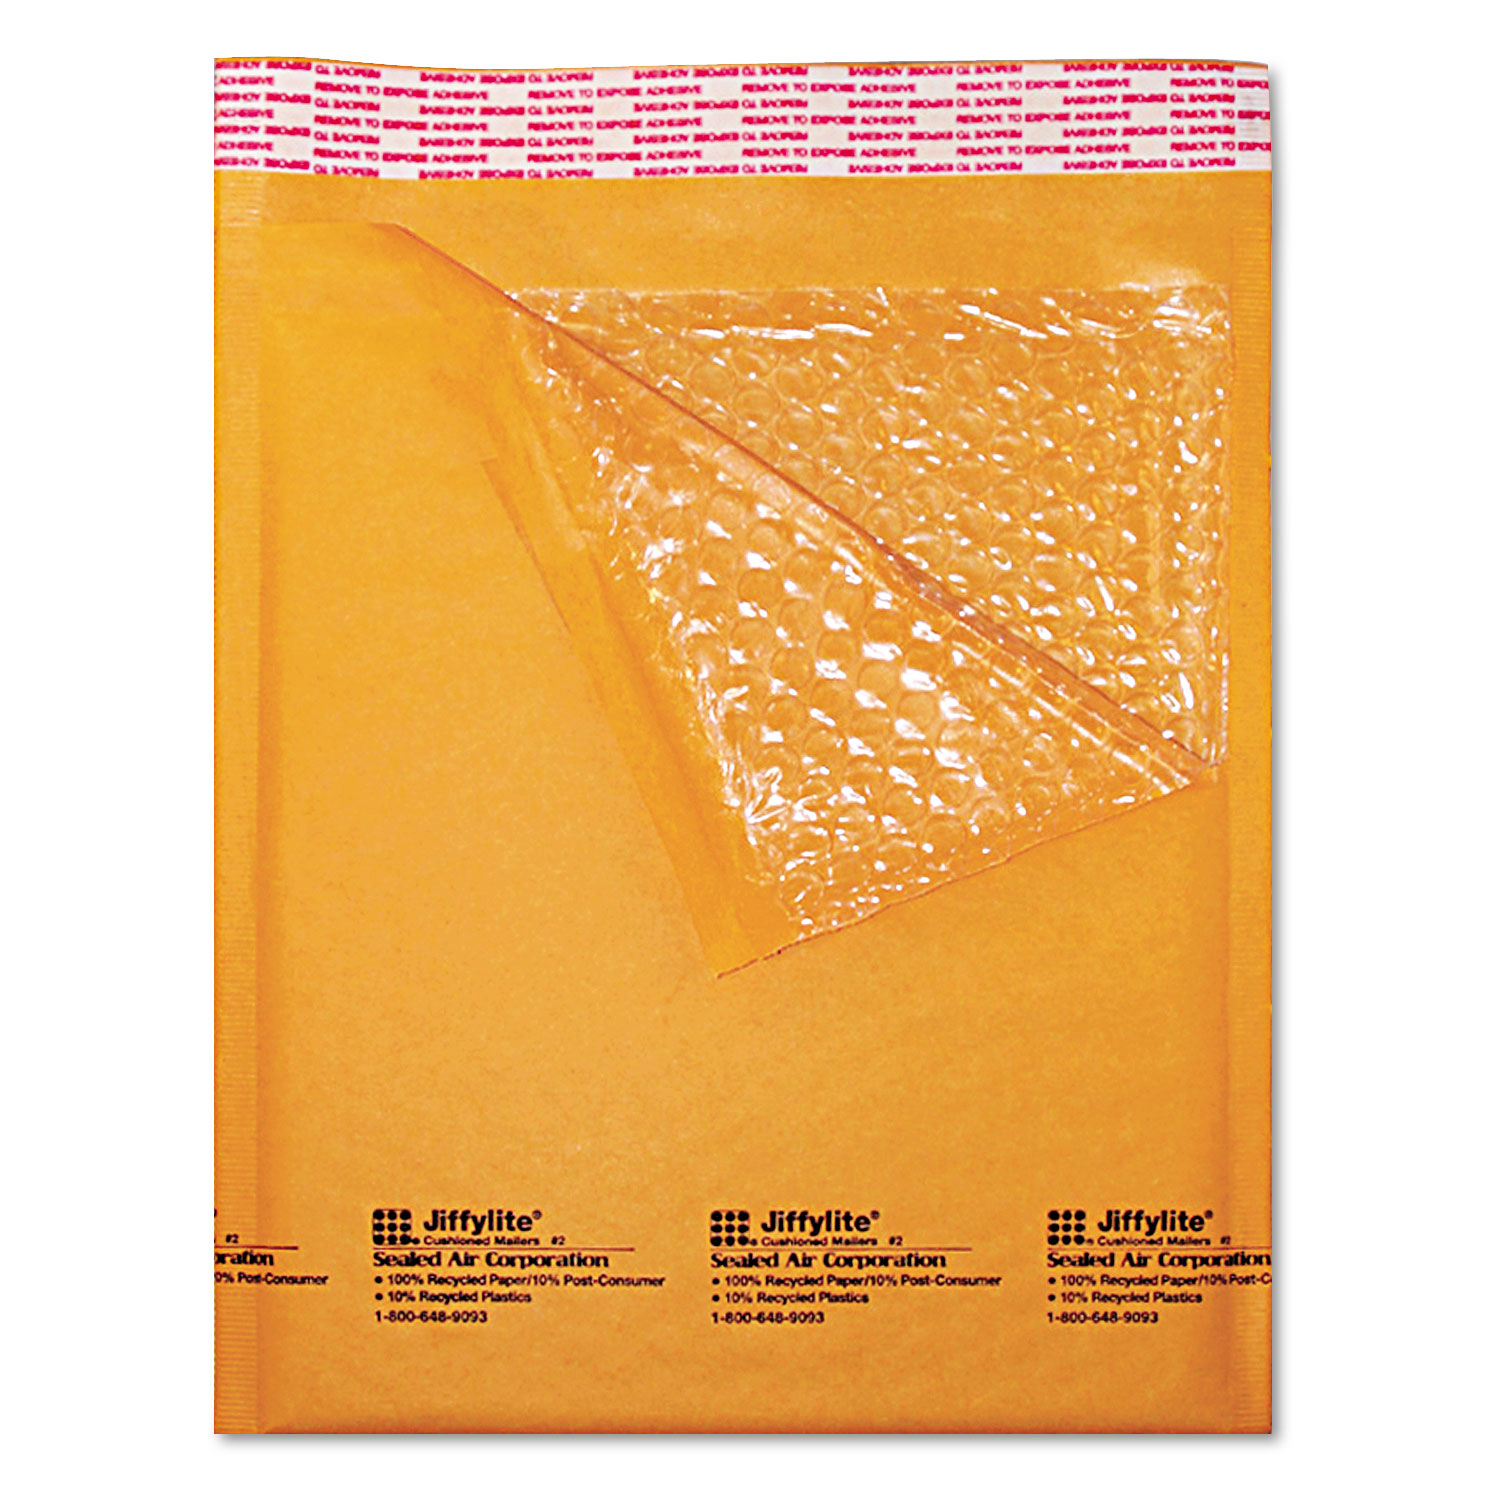  Sealed Air 100430480 Jiffylite Self-Seal Bubble Mailer, #5, Barrier Bubble Lining, Self-Adhesive Closure, 10.5 x 16, Golden Brown Kraft, 10/Pack (SEL16202) 